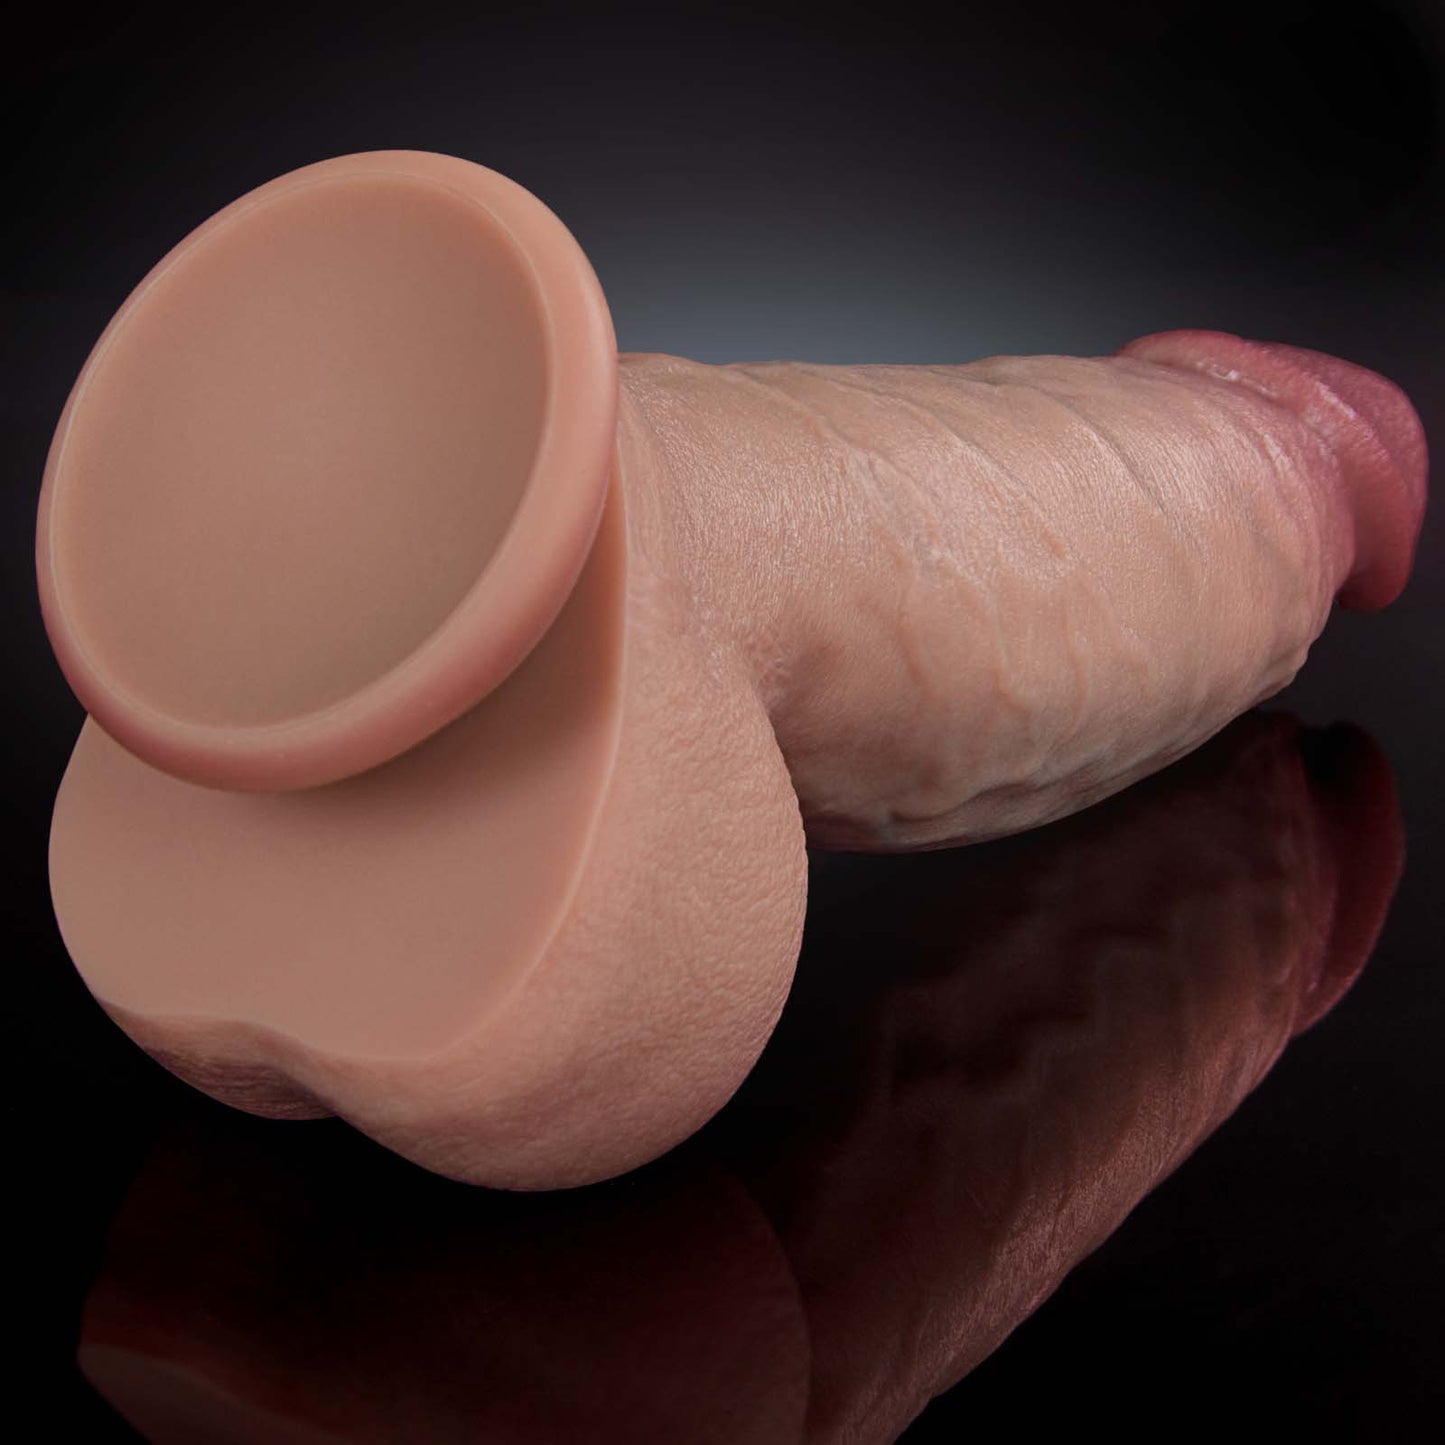 The Don Small Glans Thick Dildo